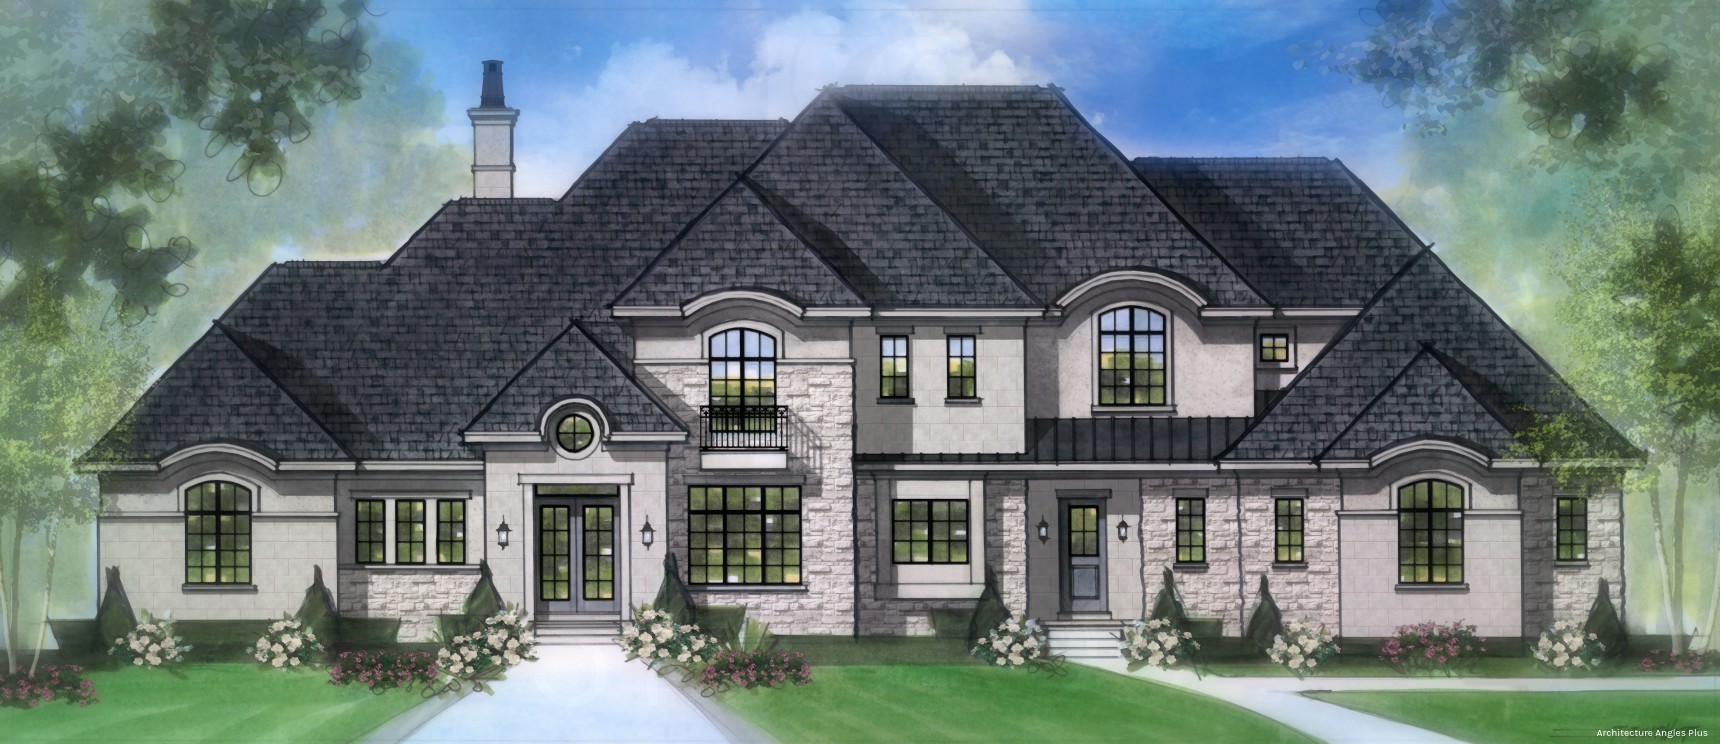 2D Classic Rendering Estate 2 Story